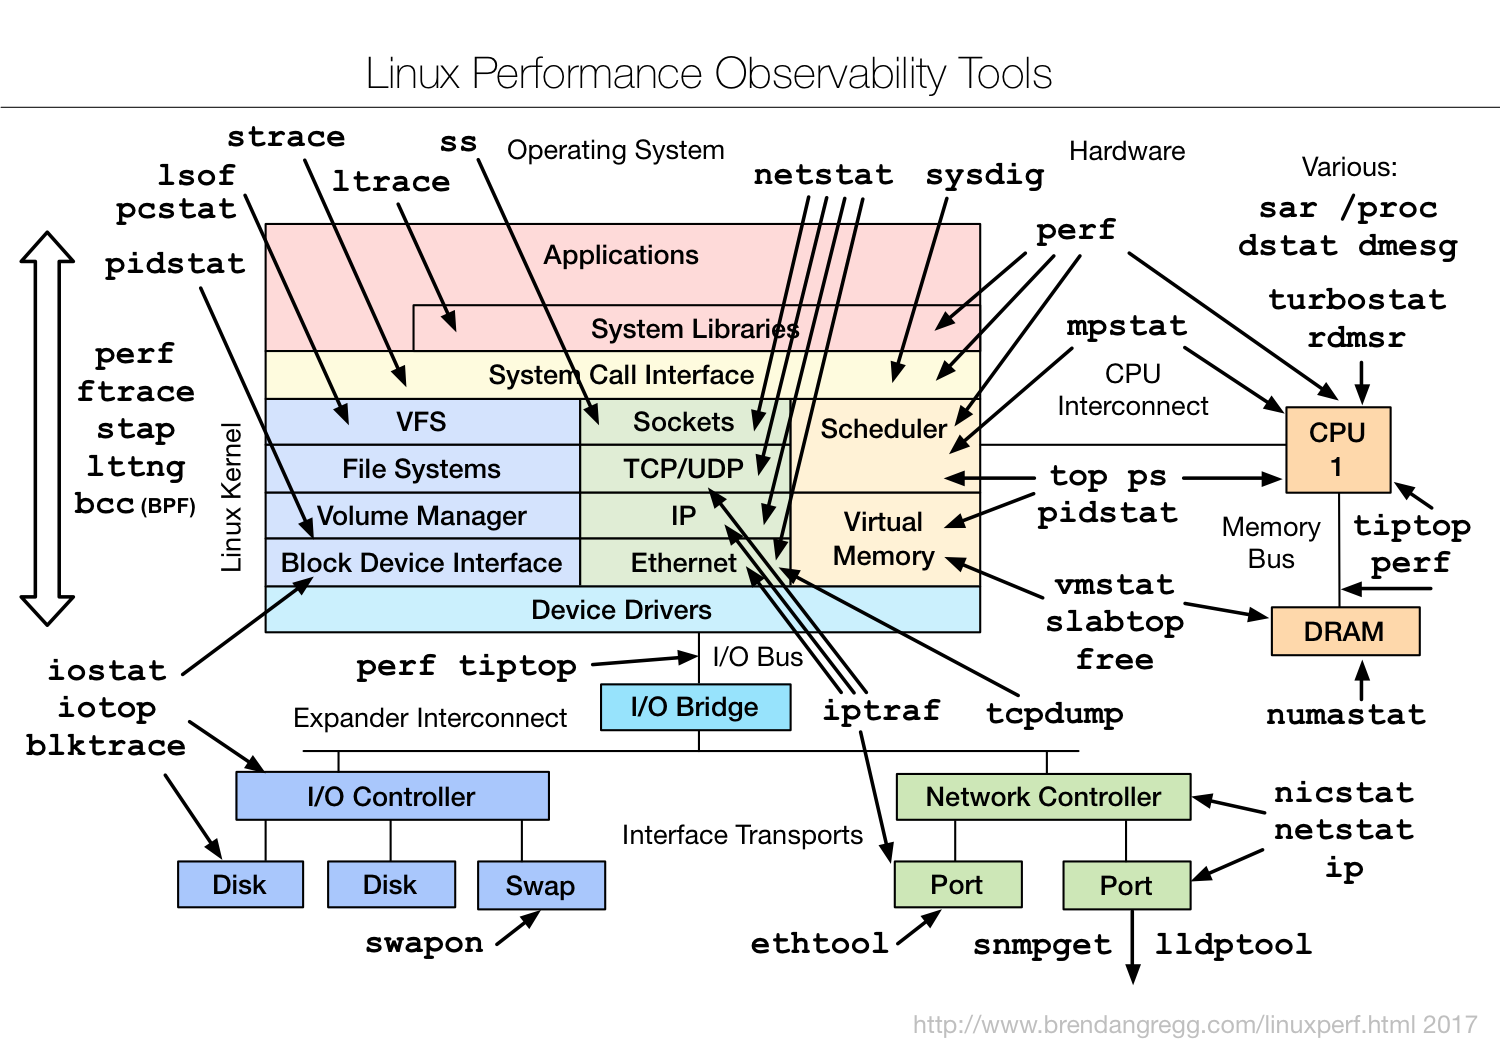 Linux Observability tools